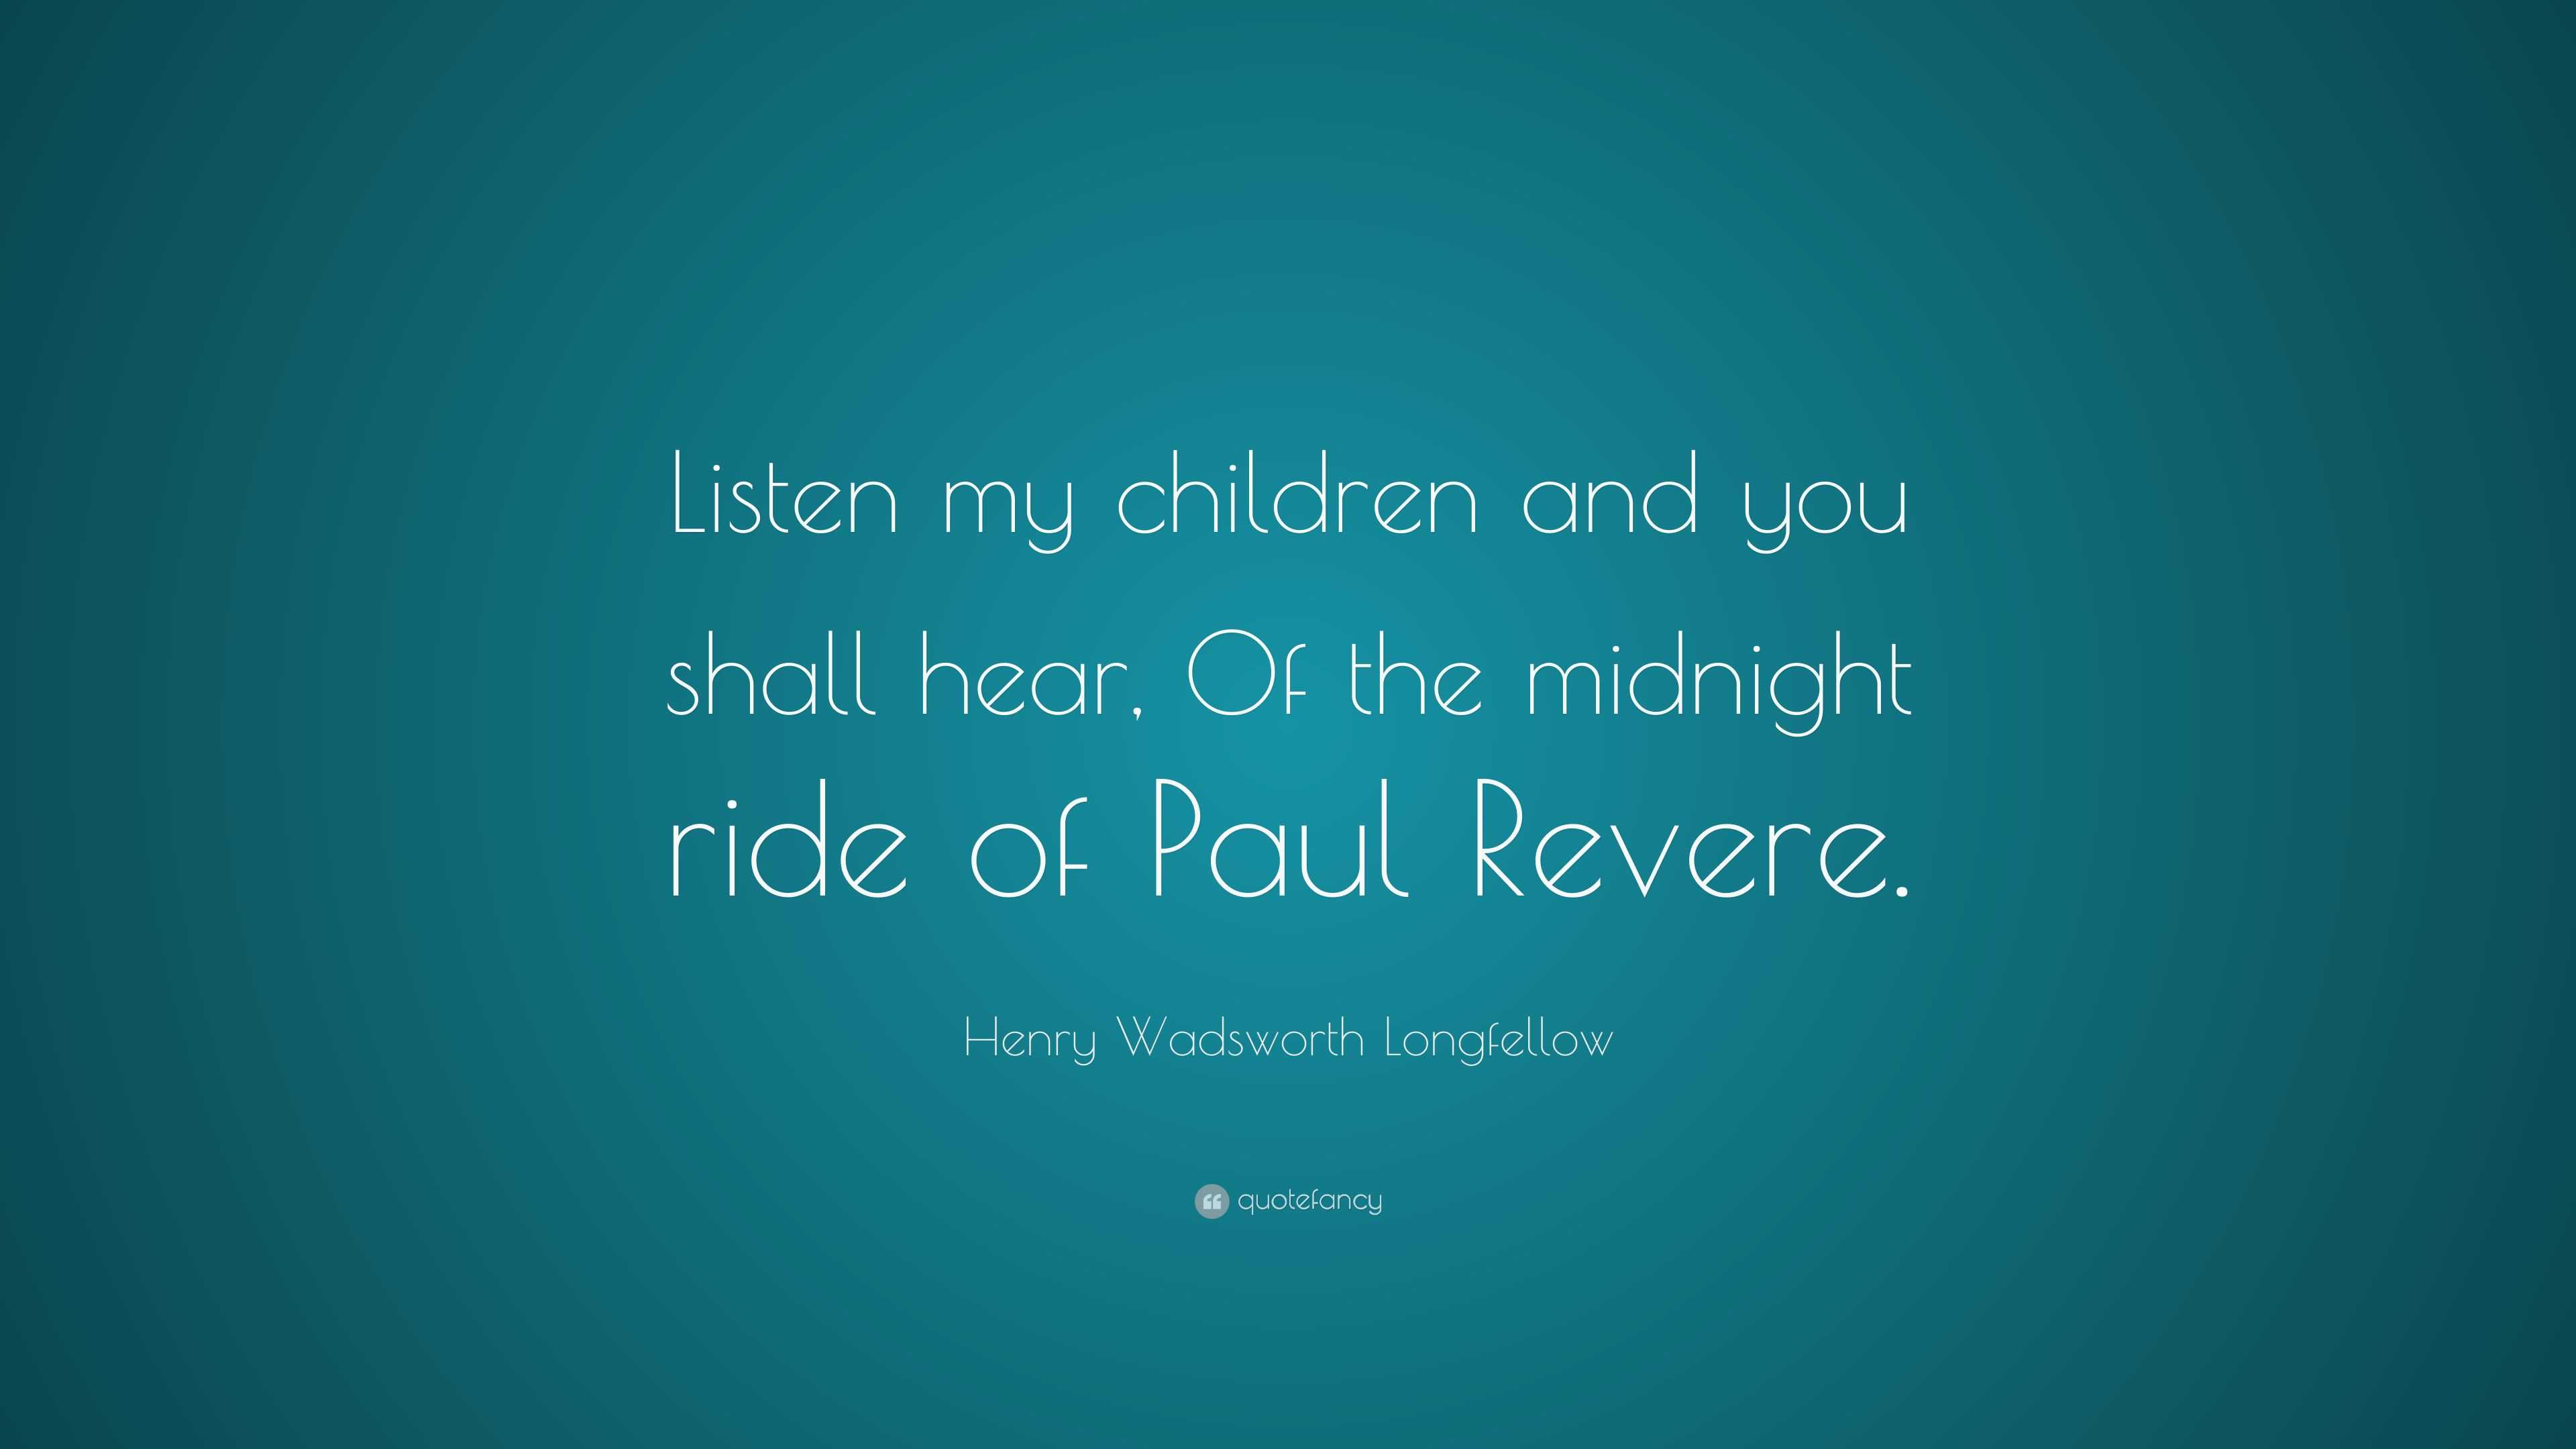 The Midnight Ride of Paul Revere by Henry Wadsworth Longfellow